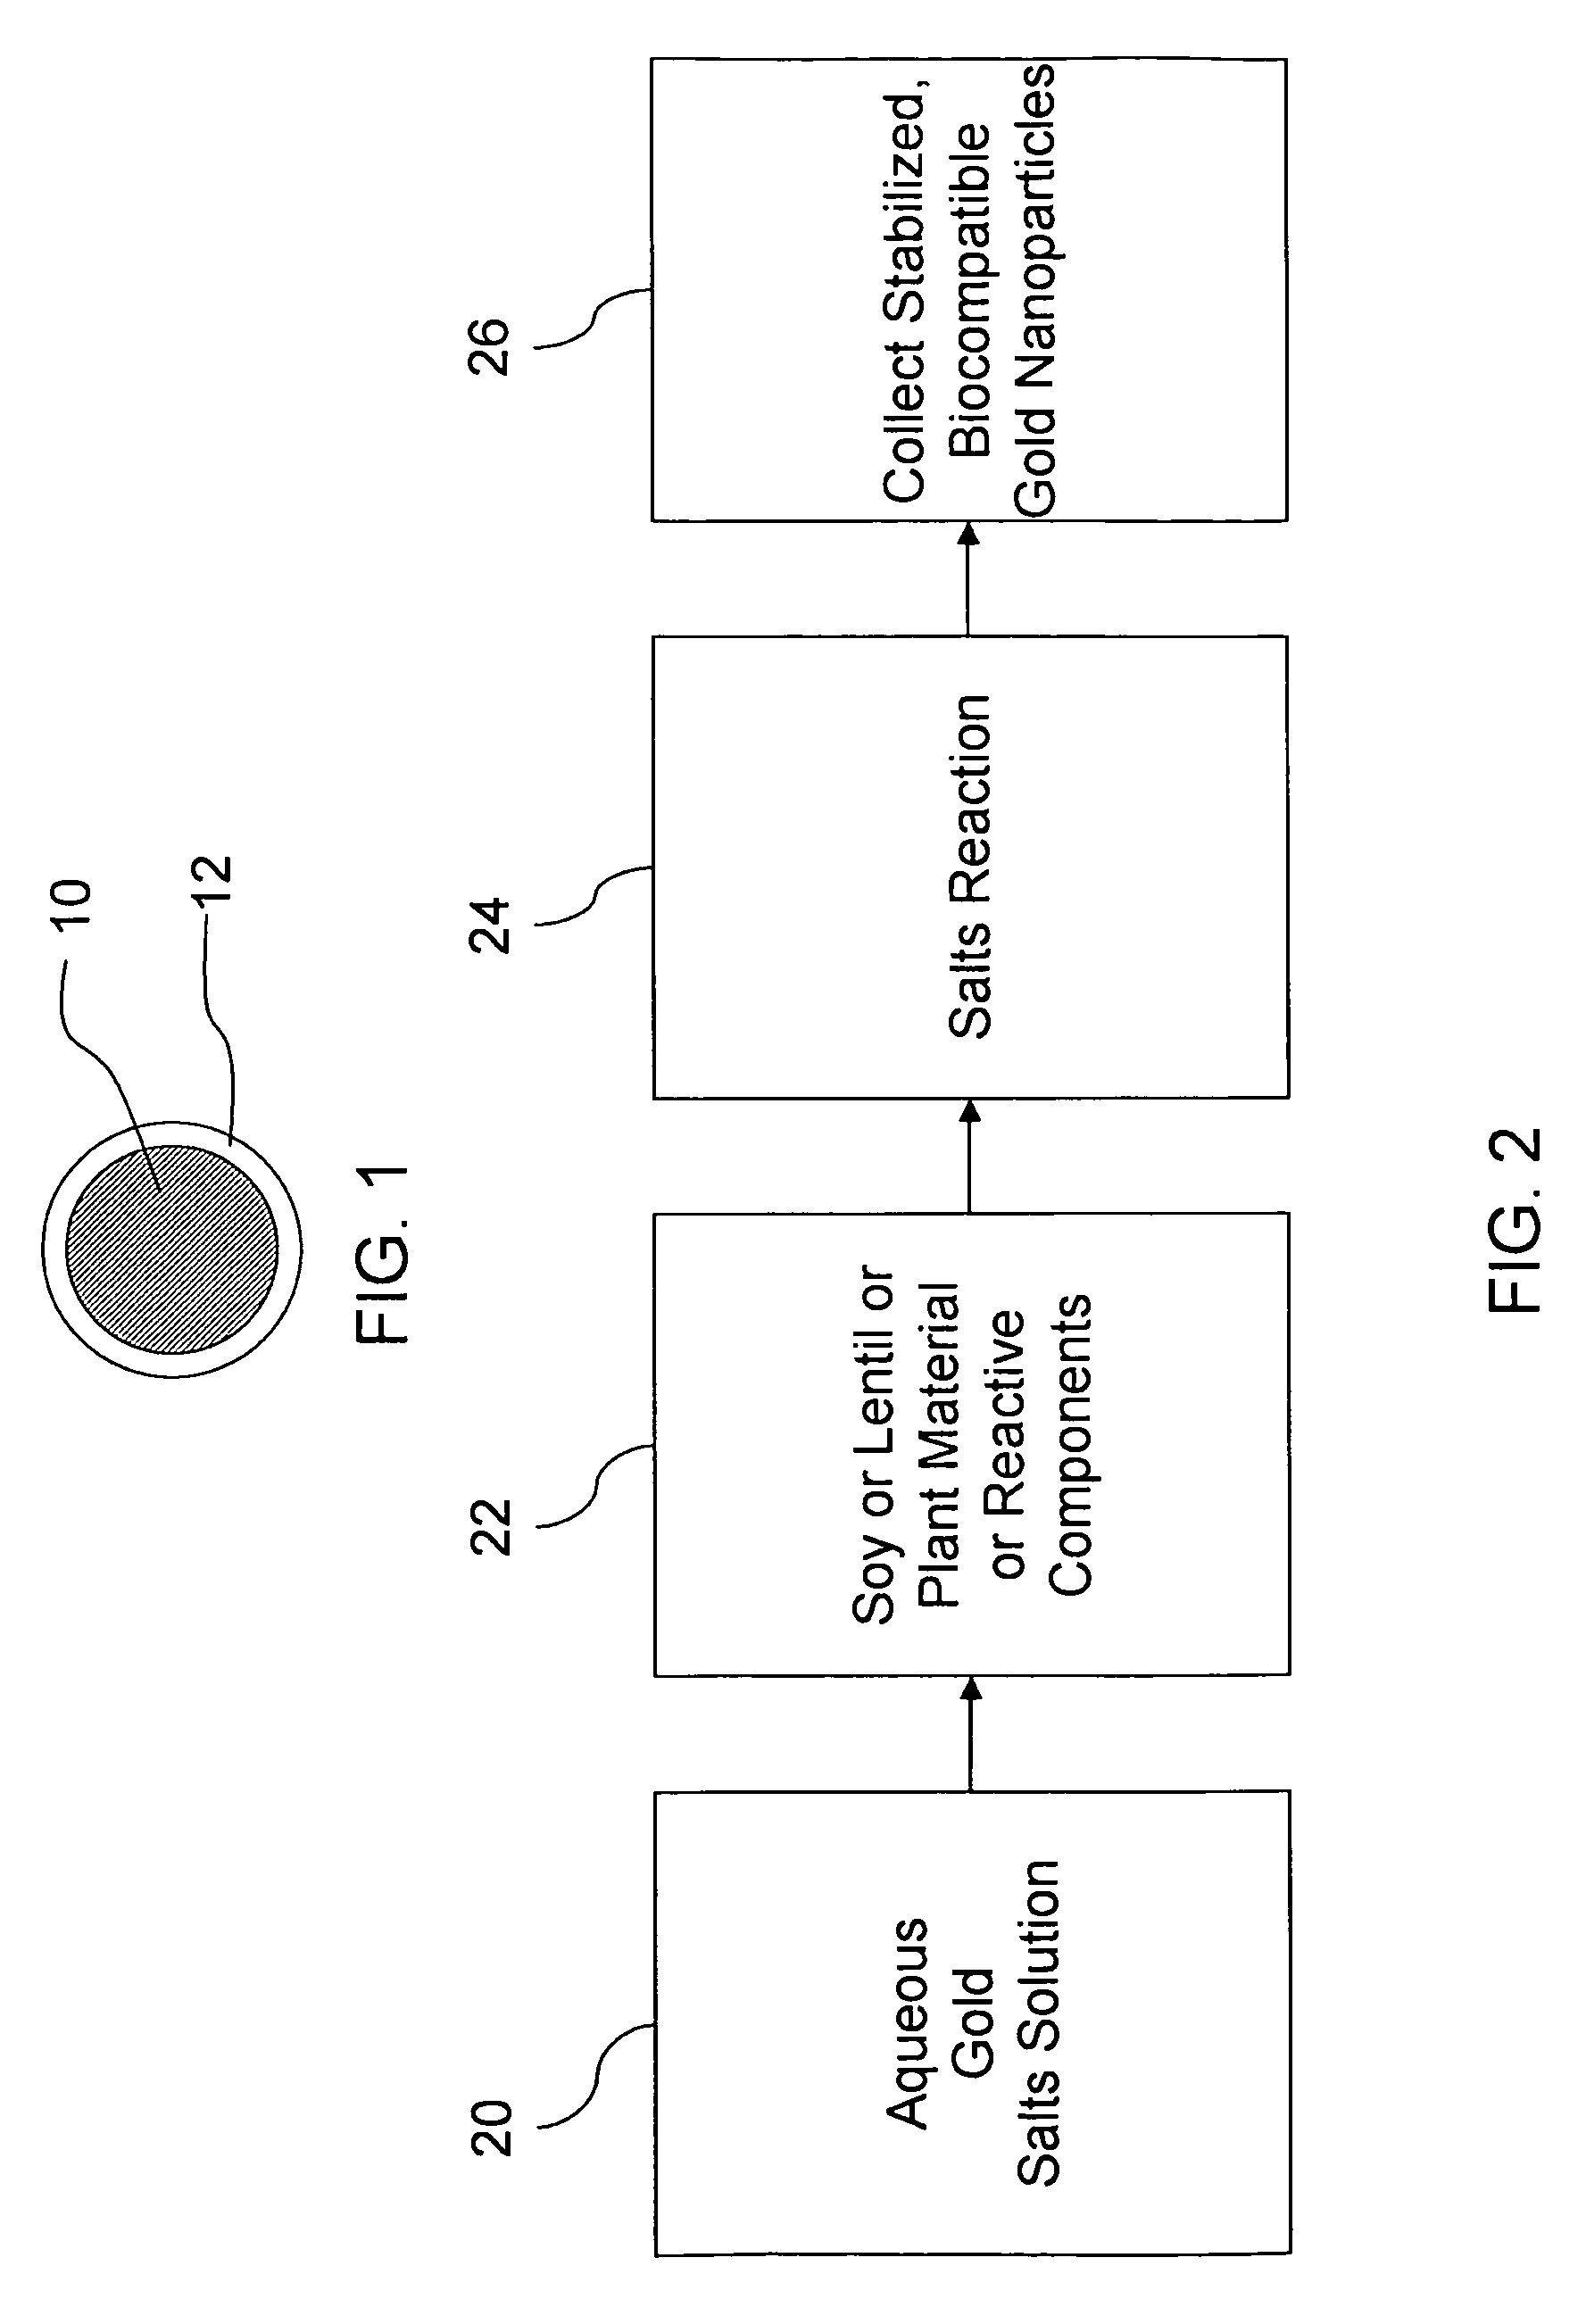 Soy or lentil stabilized gold nanoparticles and method for making same